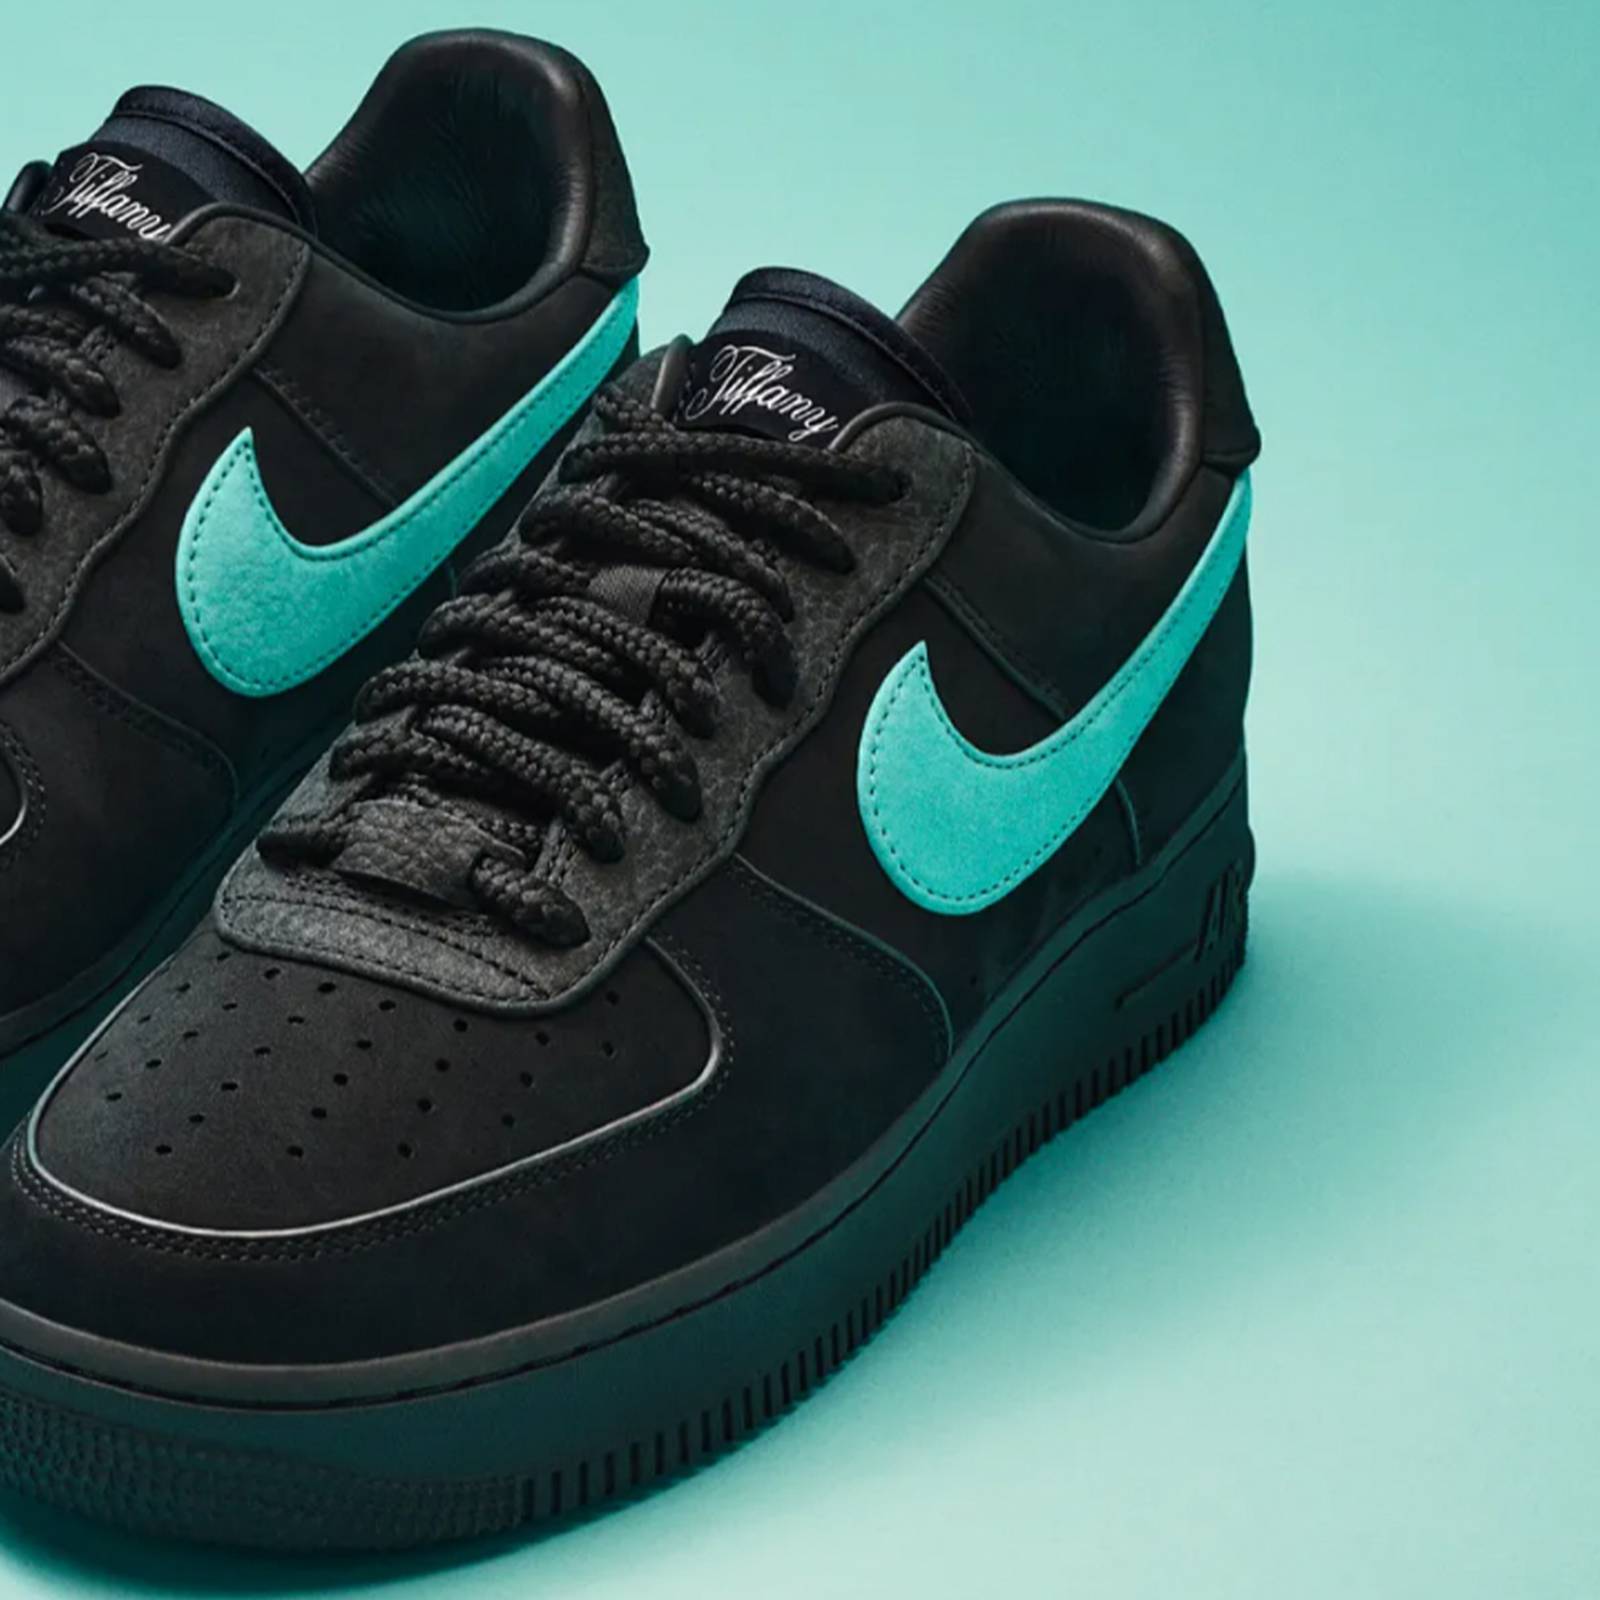 Official Look at the Tiffany & Co. x Nike Air Force 1